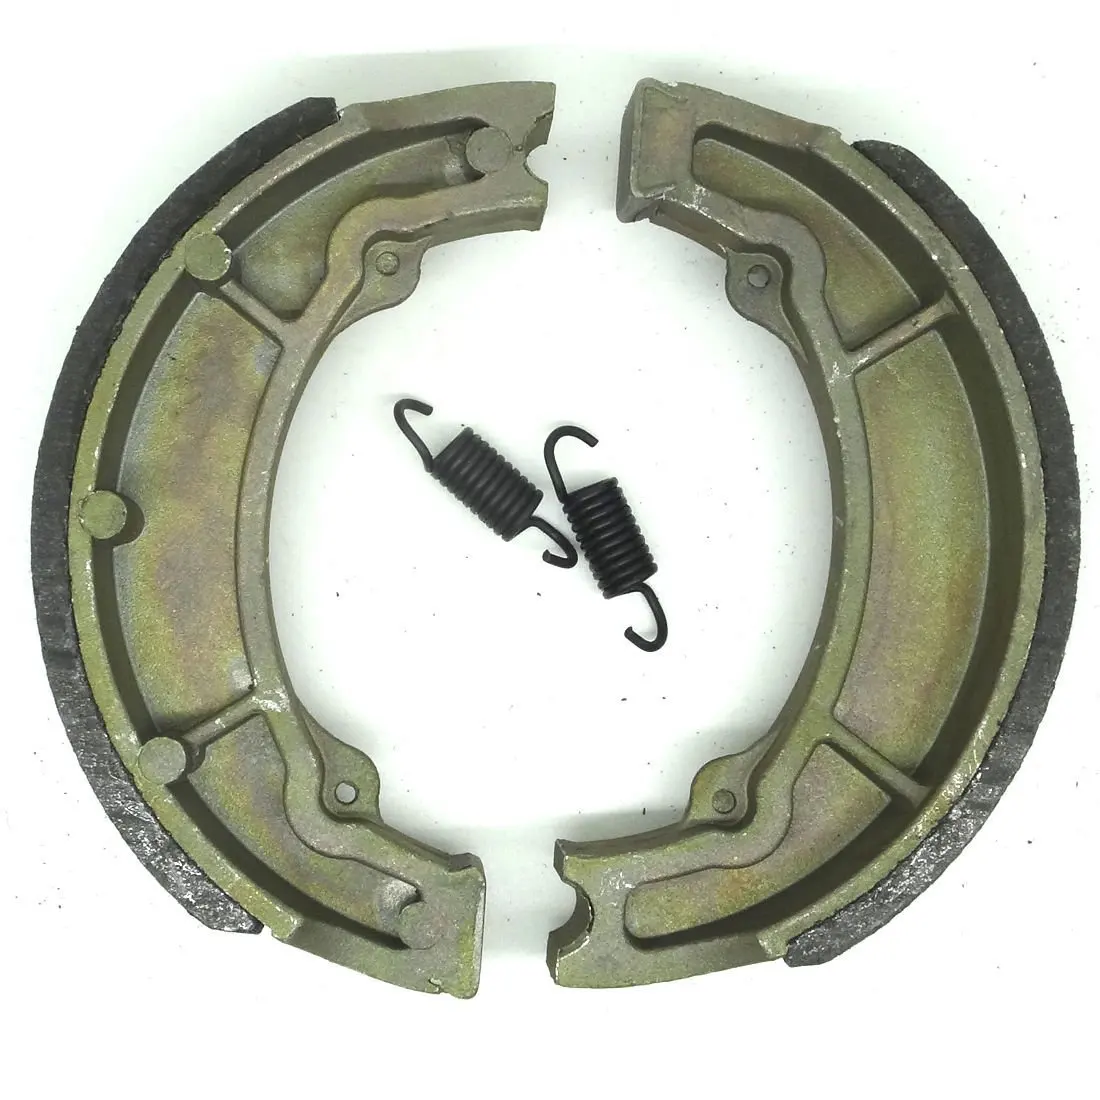 Buy Conpus Rear Brake Shoes Yamaha Grizzly 80 & 125, Breeze 125, Badger ...